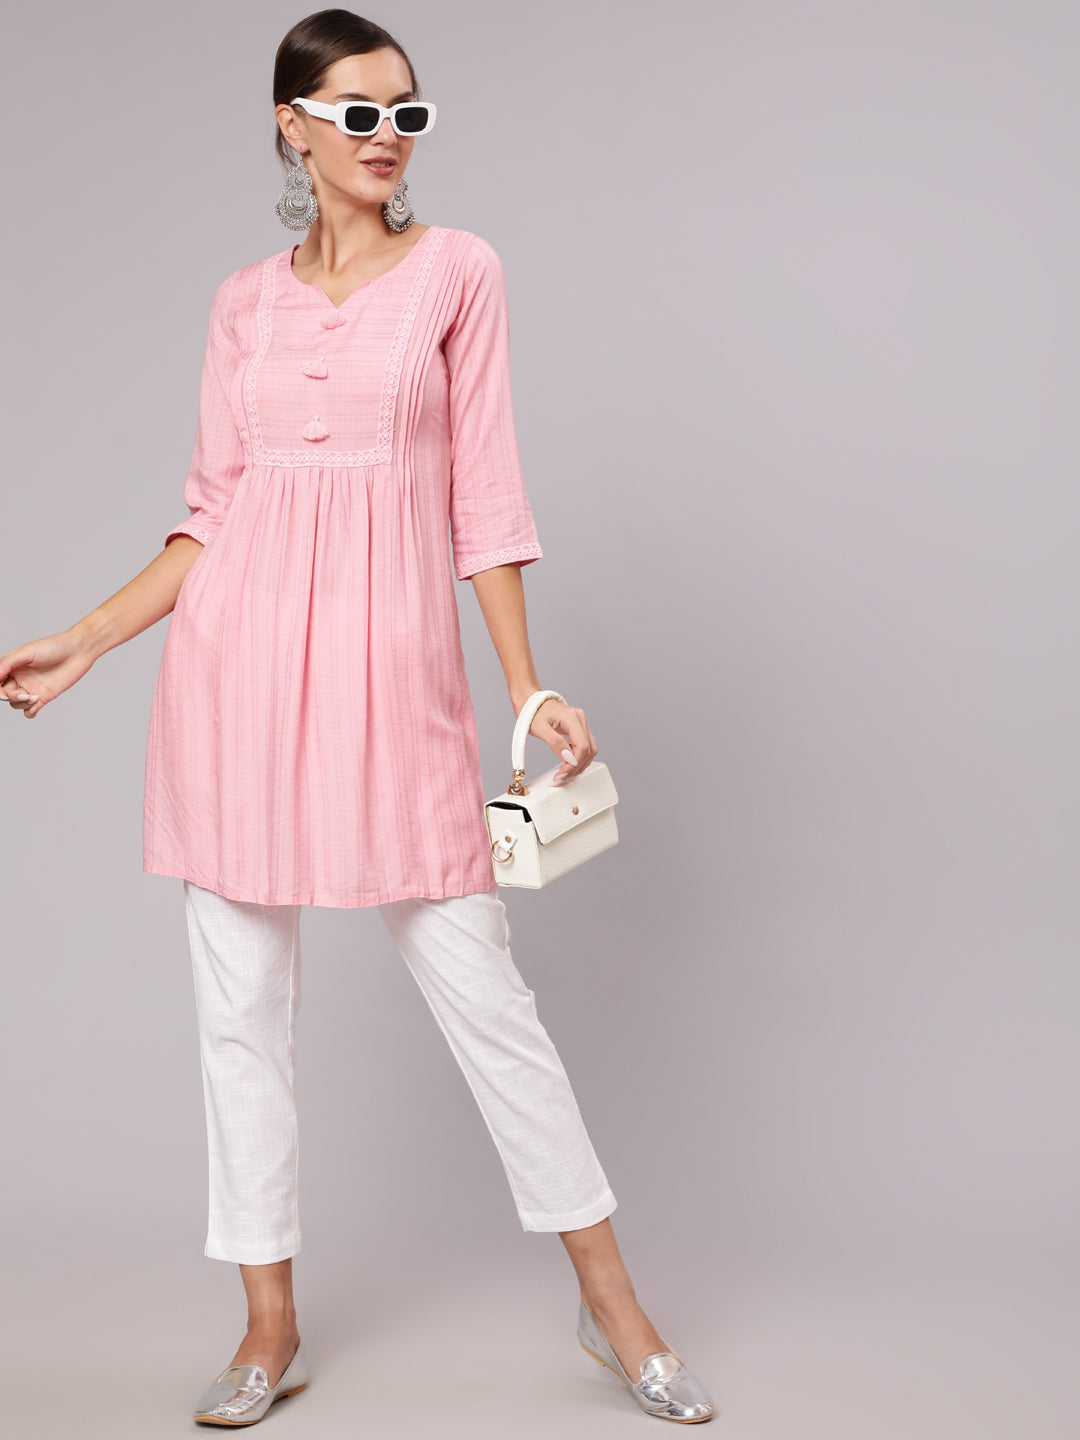 Pink Self Weave Pleated And Laced-Up Short Kurta With Tassels And Lace In Yoke, Round Neck With Notch, Pleats At Both Side Of Front Neck, Three Fourth Sleeve, Gathers In Front, Side Slit.